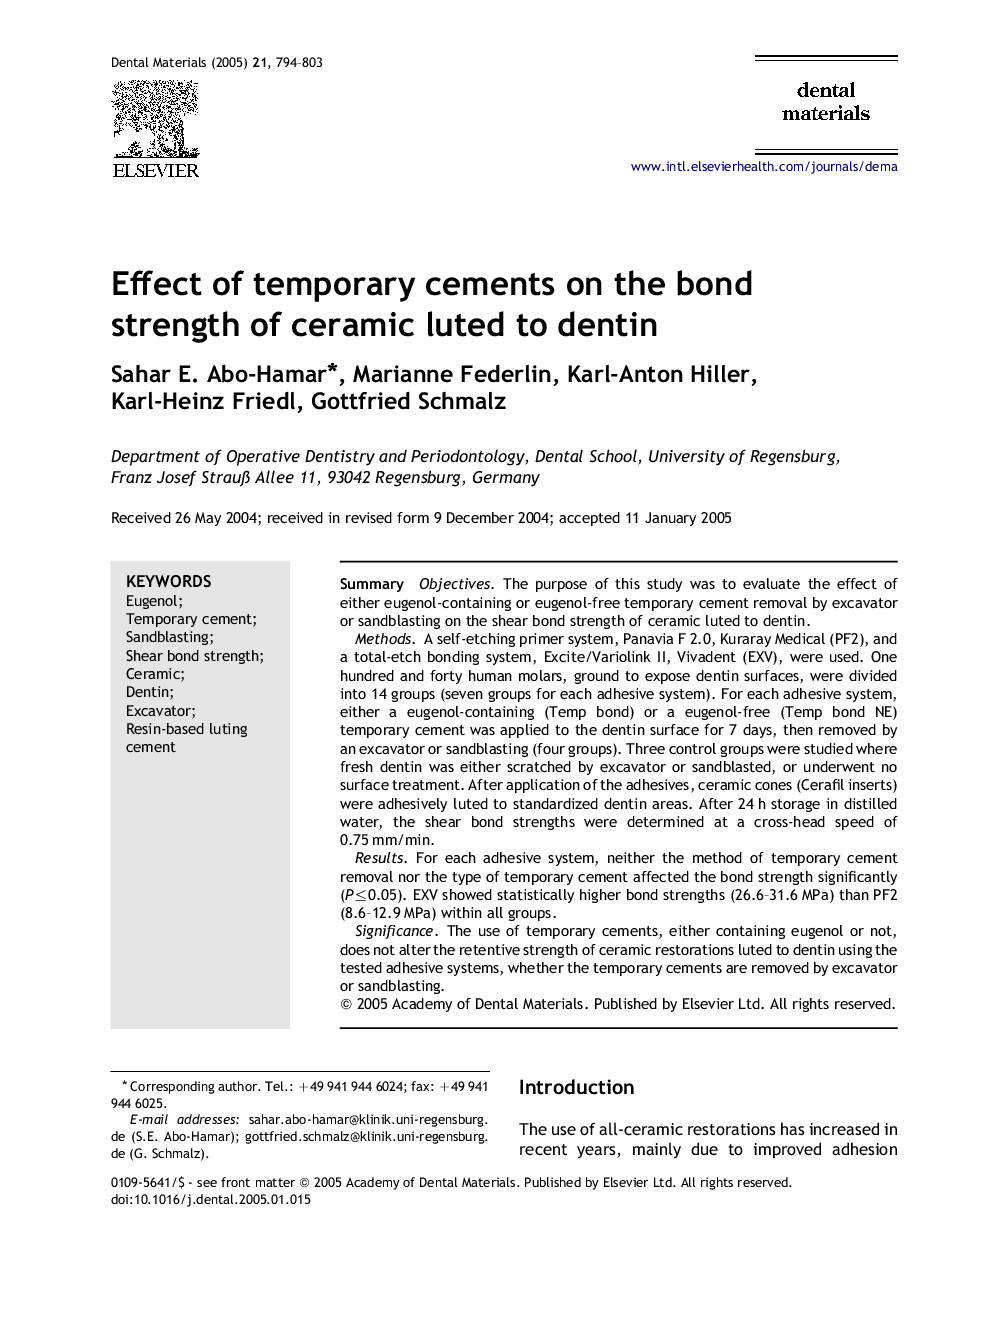 Effect of temporary cements on the bond strength of ceramic luted to dentin